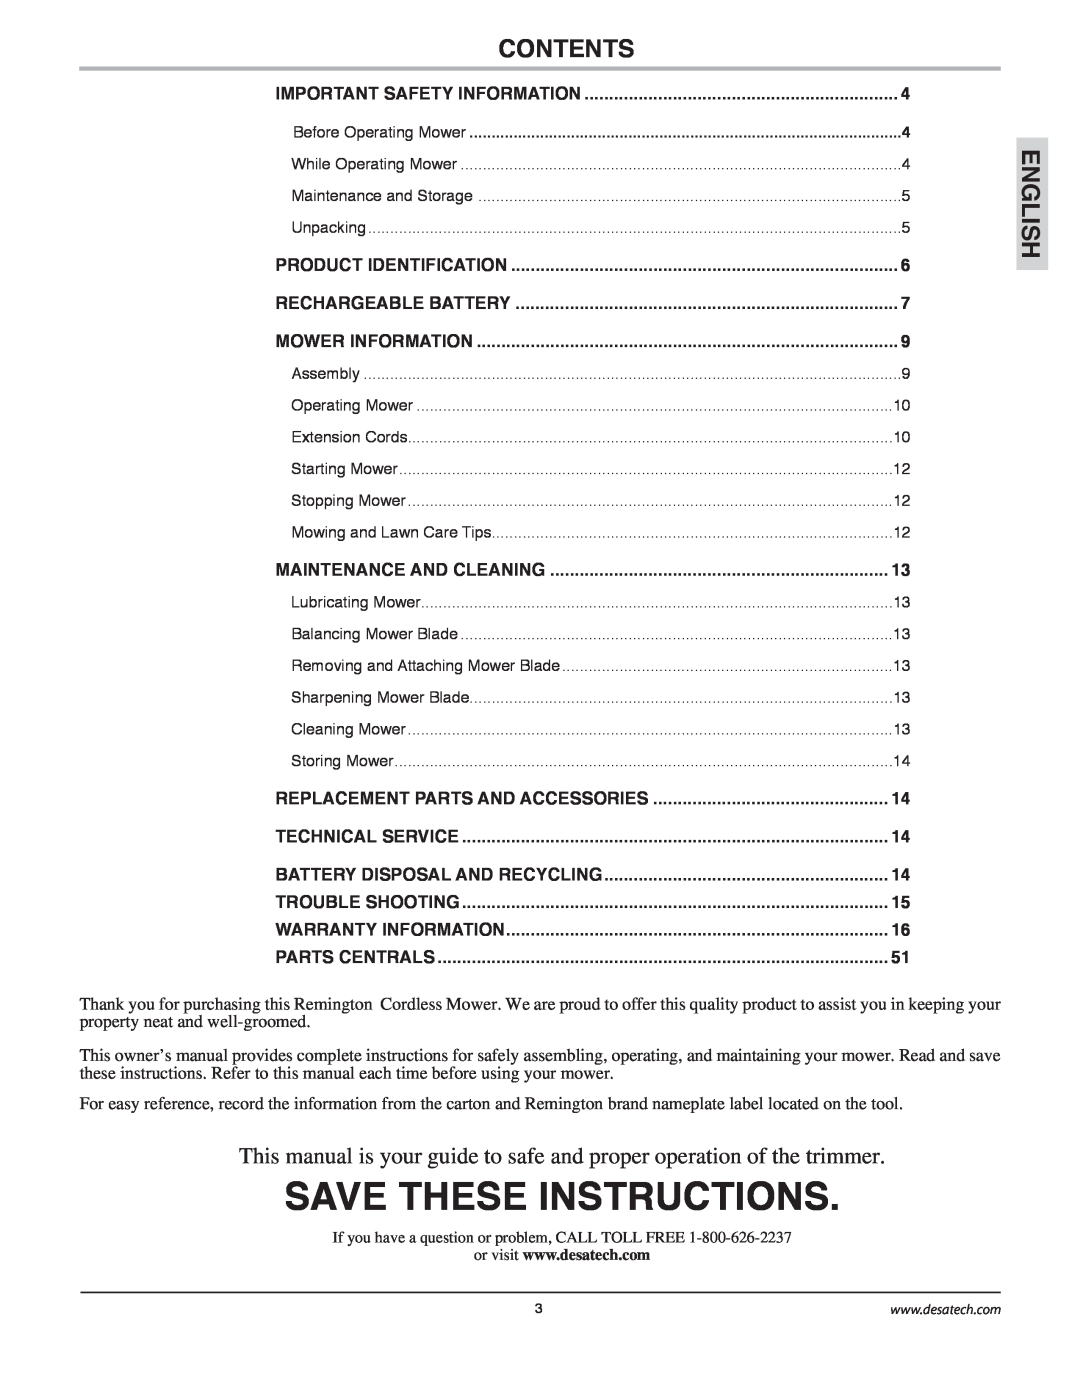 Remington Power Tools MPS6017A manual Save These Instructions, Contents, English 